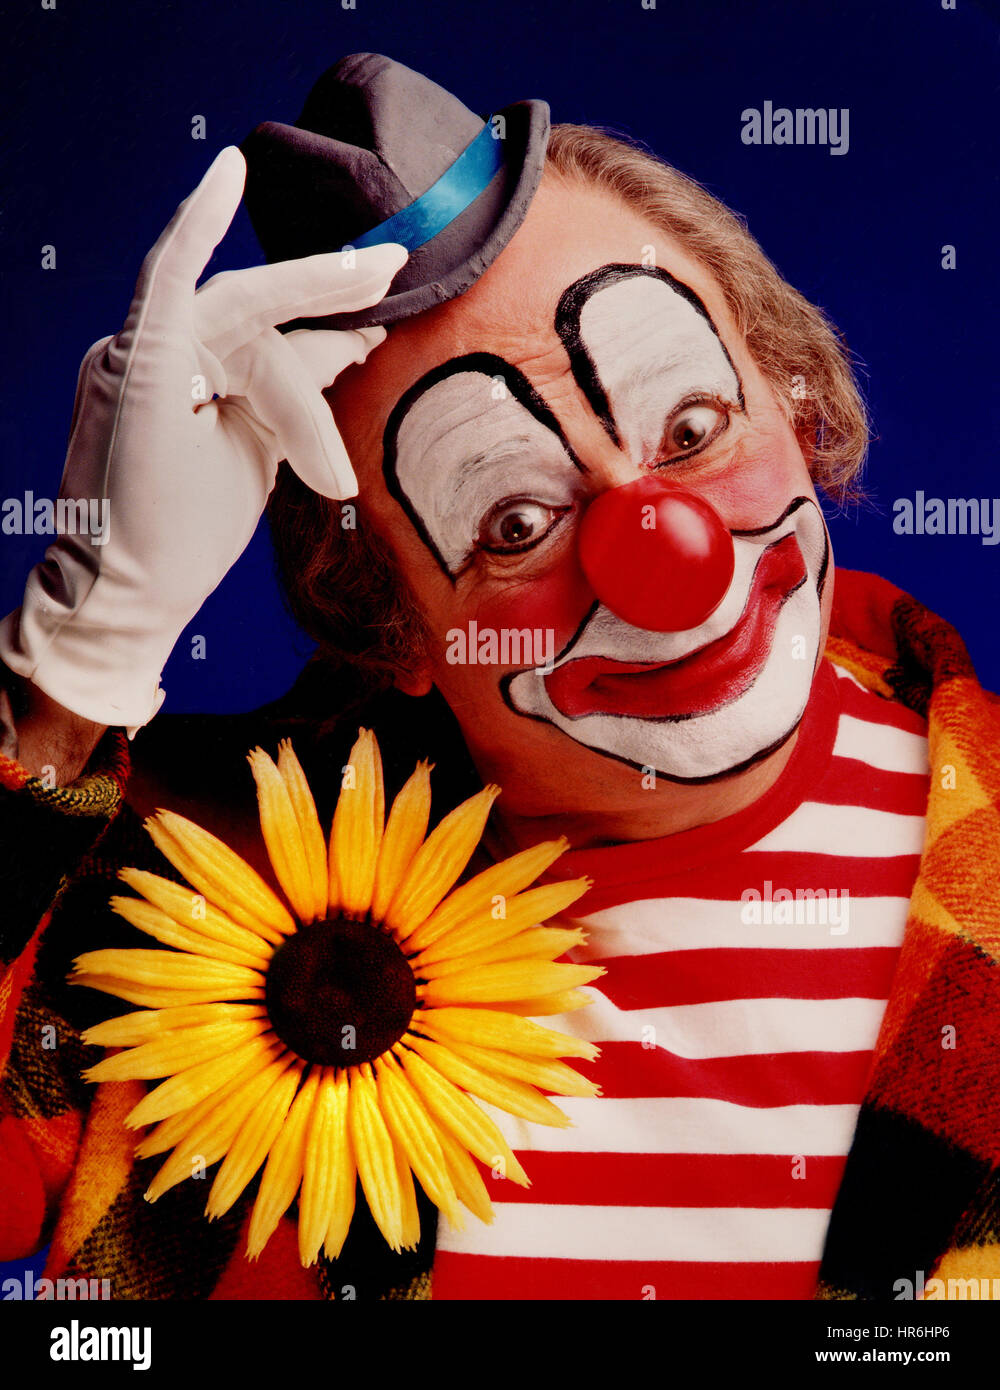 Clown poster colourful circus costume with traditional red nose posing for a studio photograph to promote via POS dealer poster display Kodak negative colour film 1970’s /1980’s Ian Shaw Kodak Photographer Stock Photo